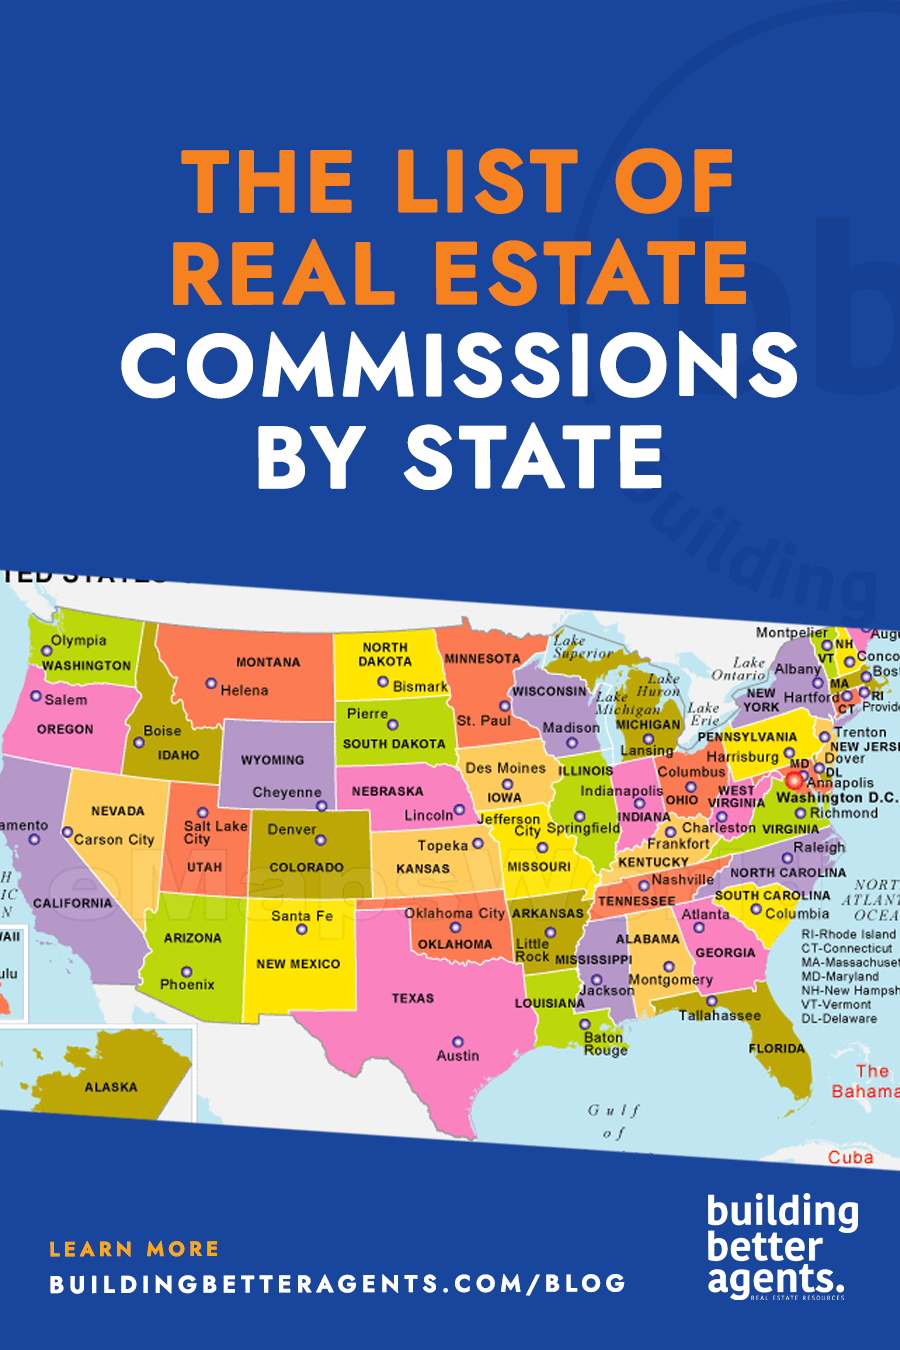 Thinking about getting your real estate license? Check out this map of all the US real estate commissions. 